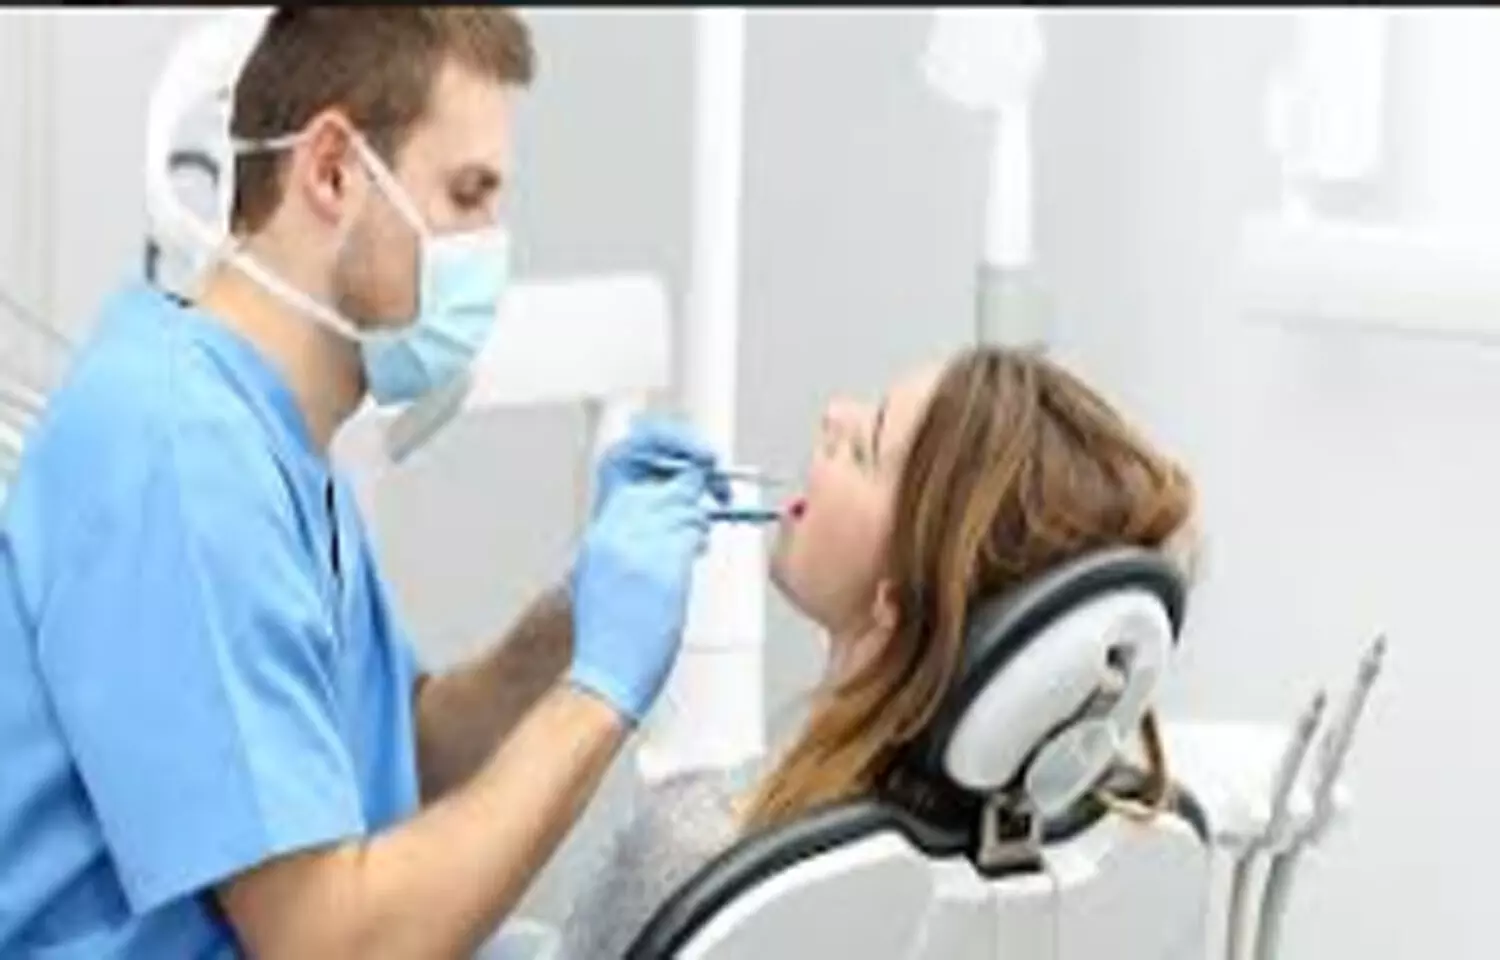 Dental professionals at high occupational risk of COVID-19, Study says